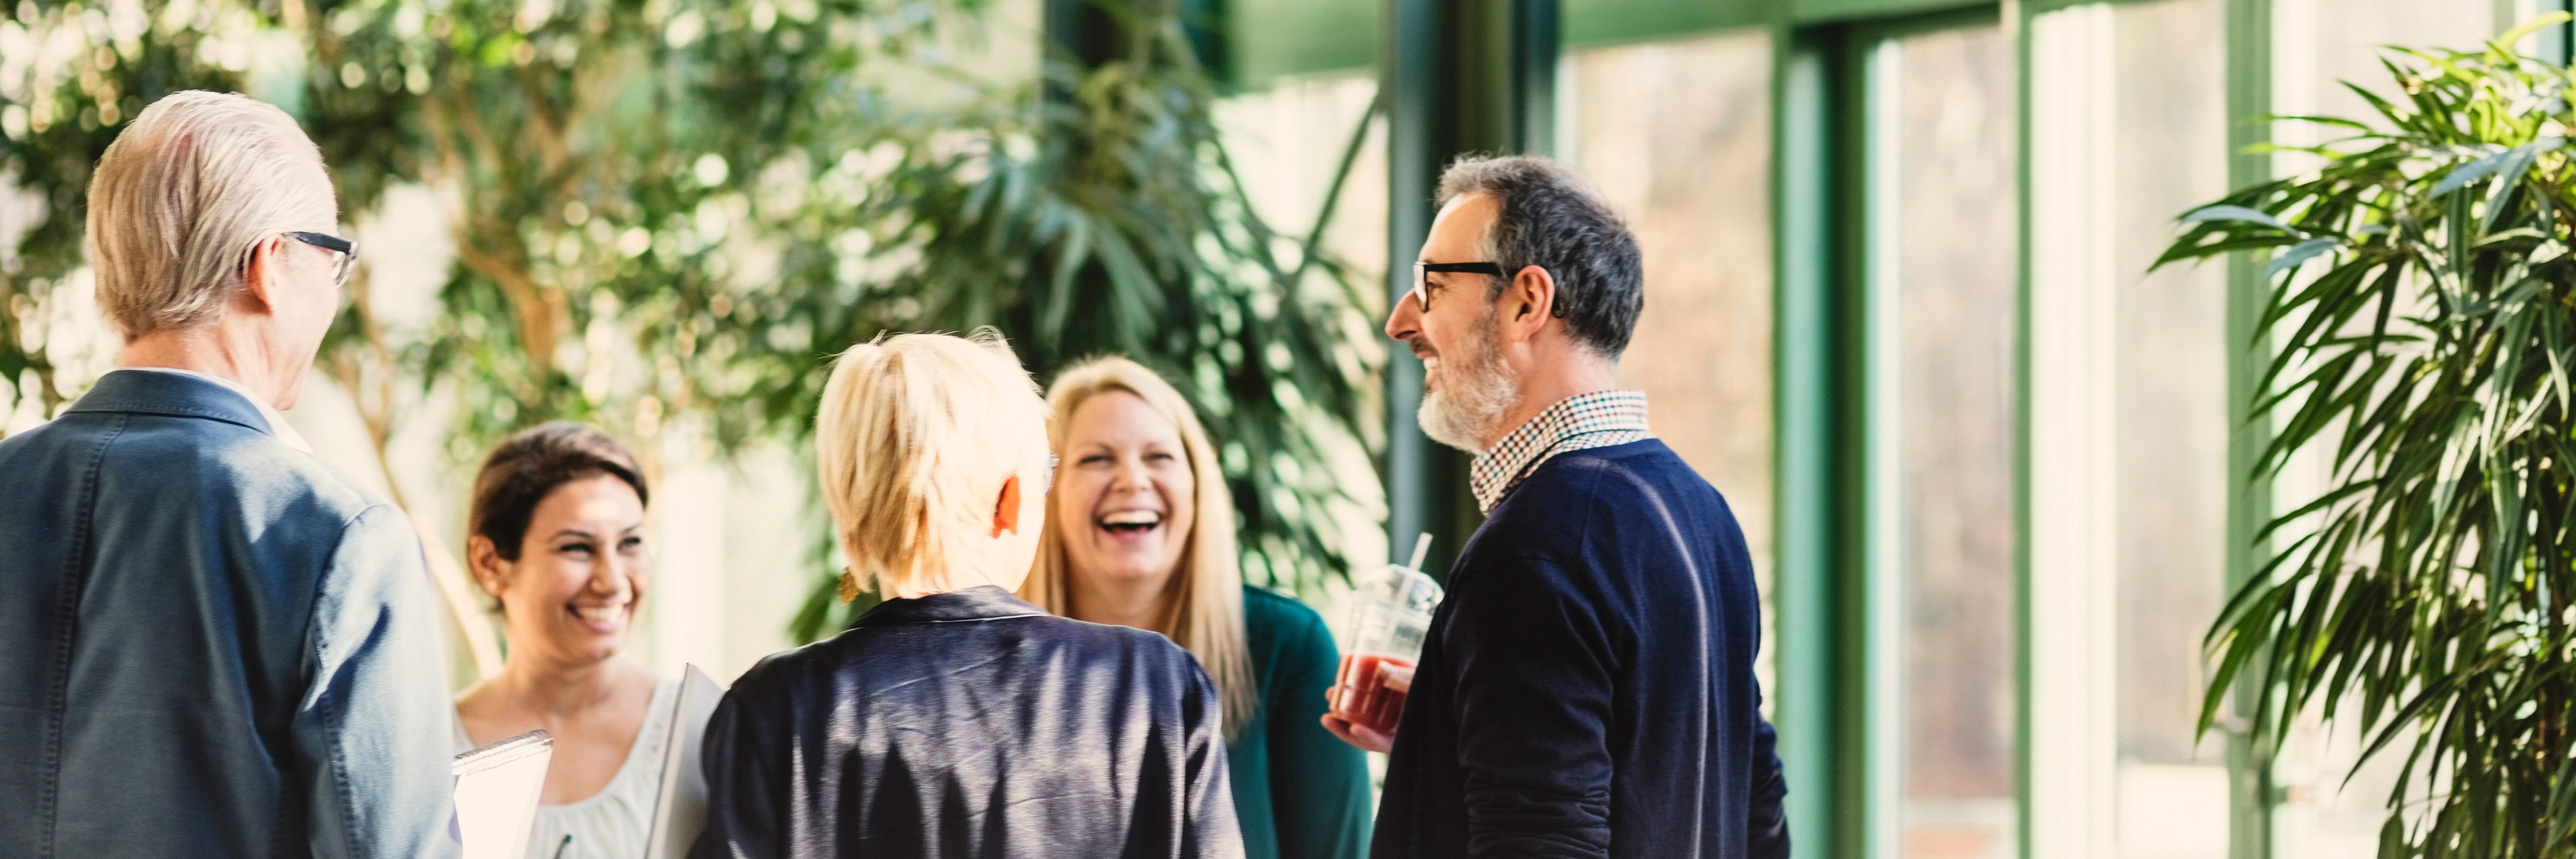 Group of professionals laughing at networking event